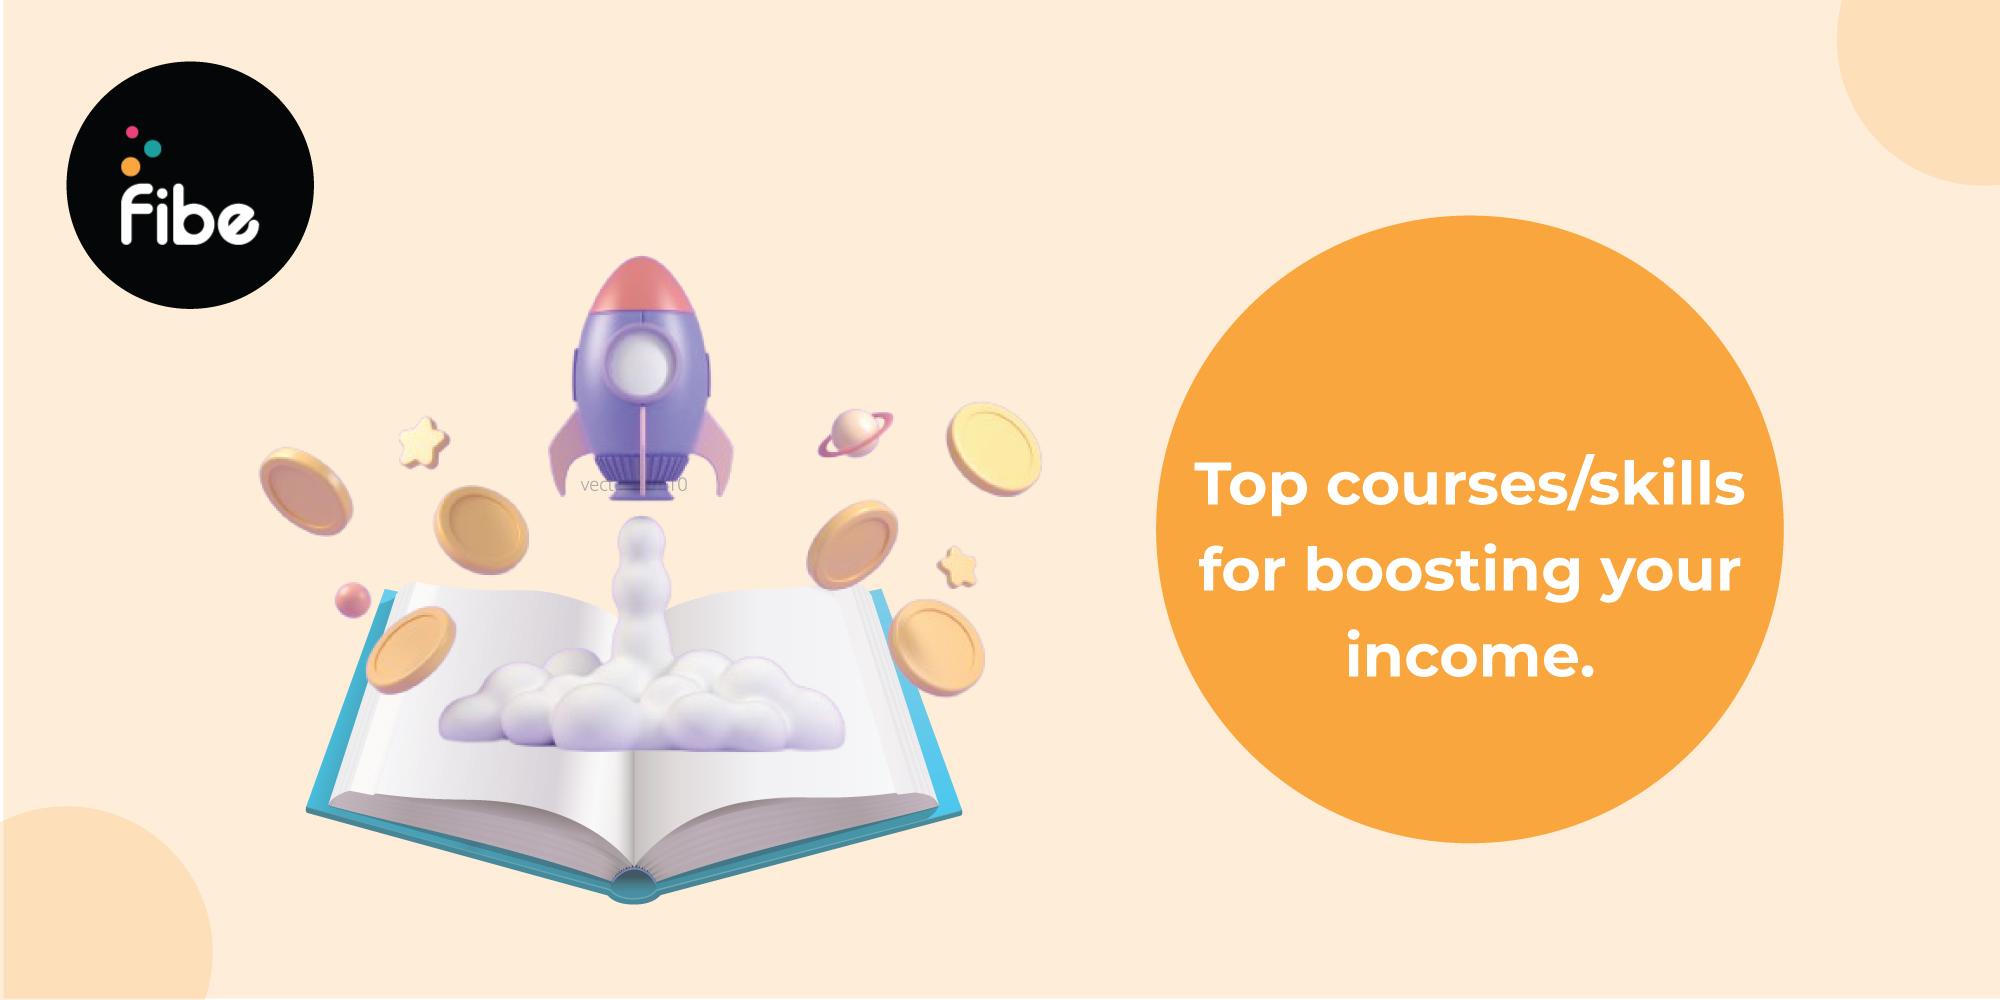 Courses for Upskilling: Know how to earn more with these 8 skills